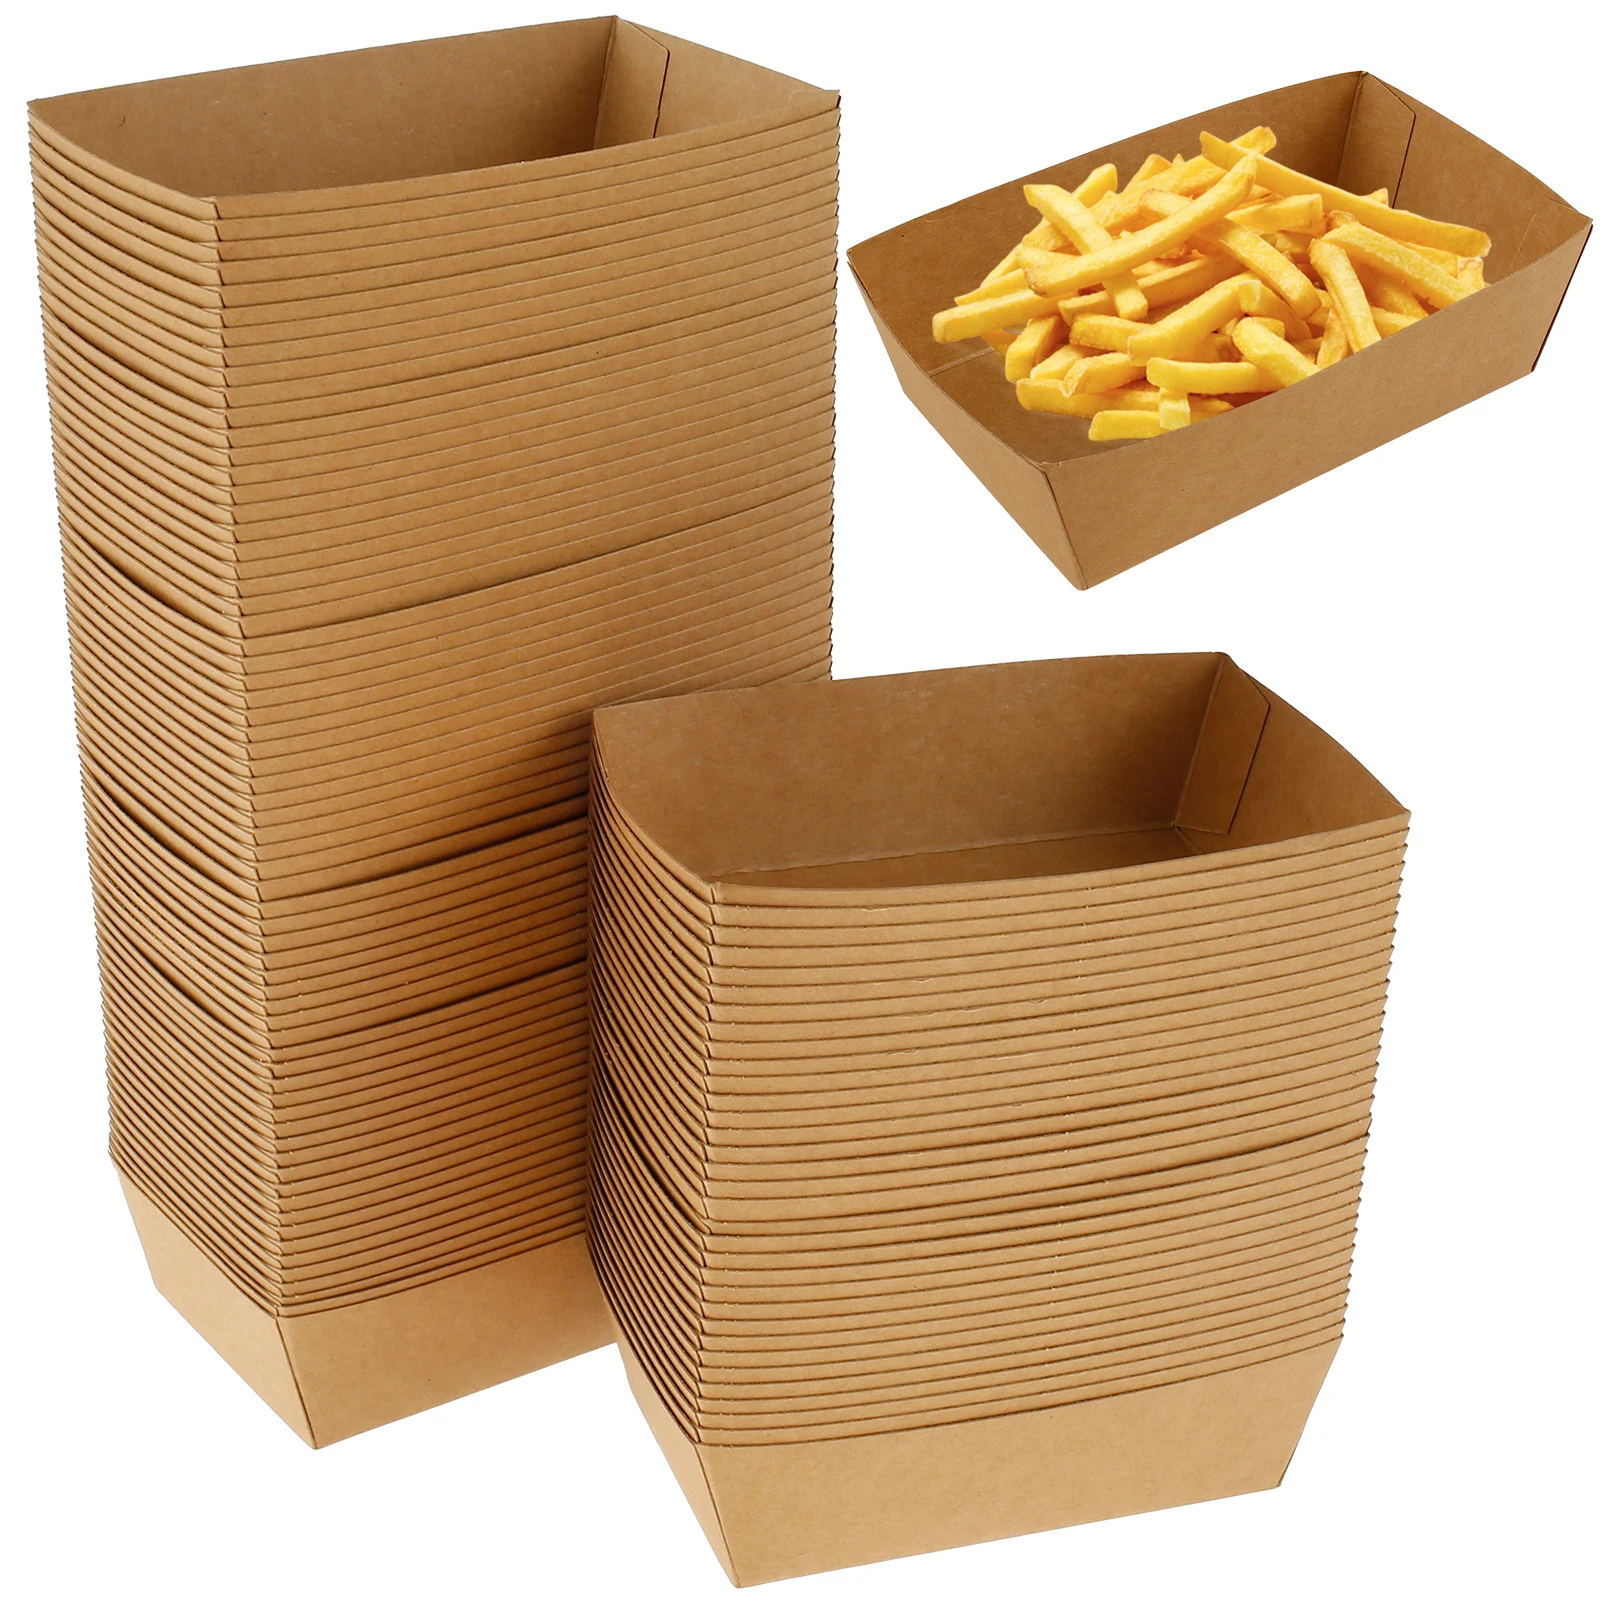 

100Pcs Brown Paper Food Boxes Oil Proof Paper Food Boat Recyclable Paper Food Tray Boat Shape Take Out Food Trays Paper Food Box